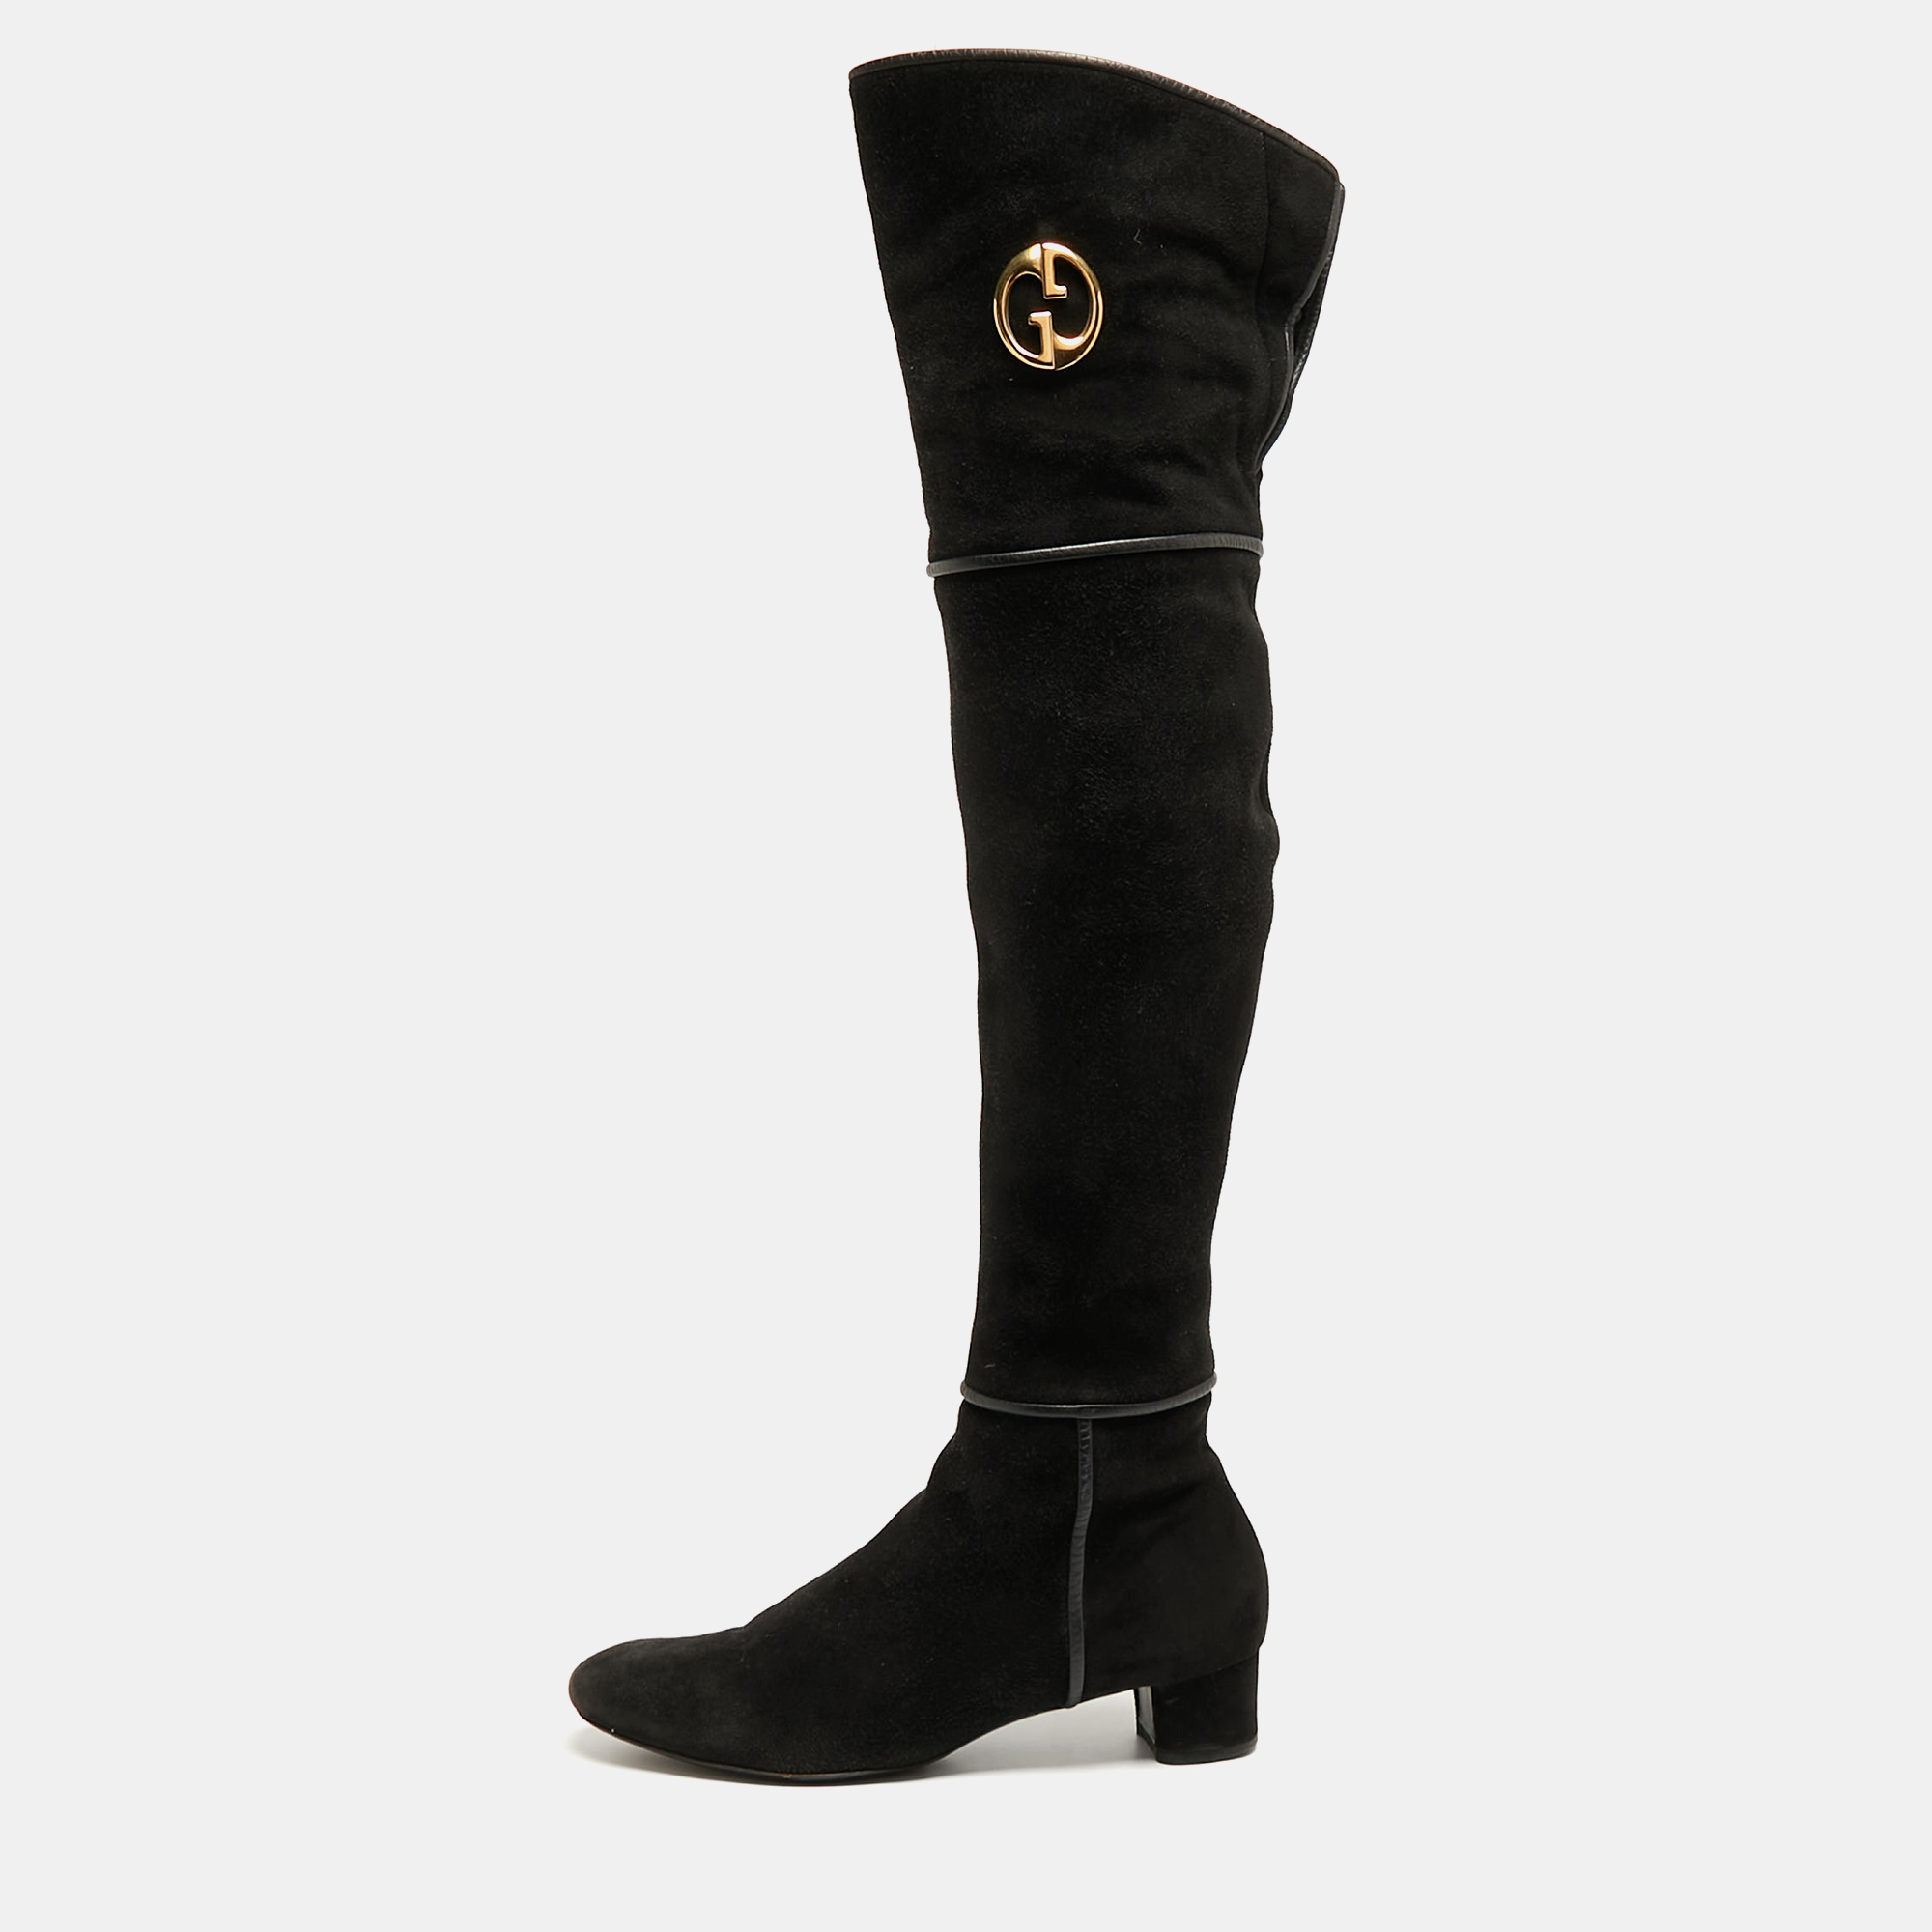 Pre-owned Gucci Black Suede Knee Length Boots Size 38.5